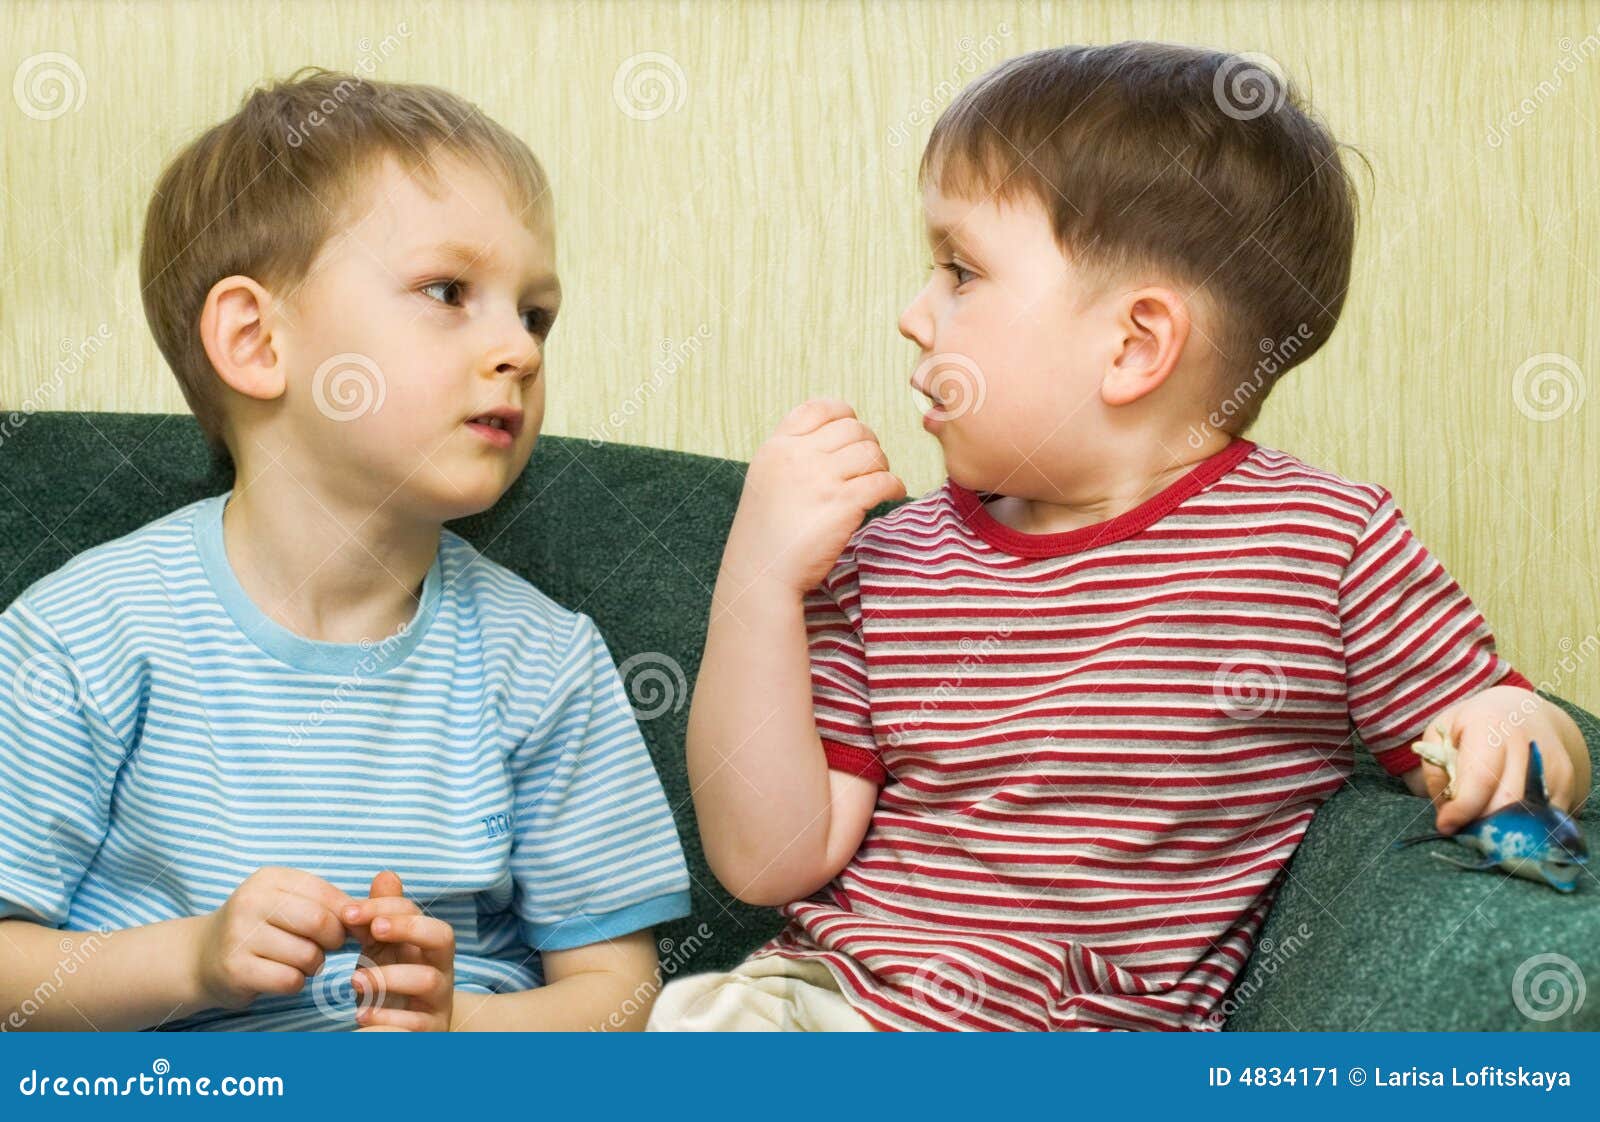 Conversation Of Two Friends Stock Image Image of